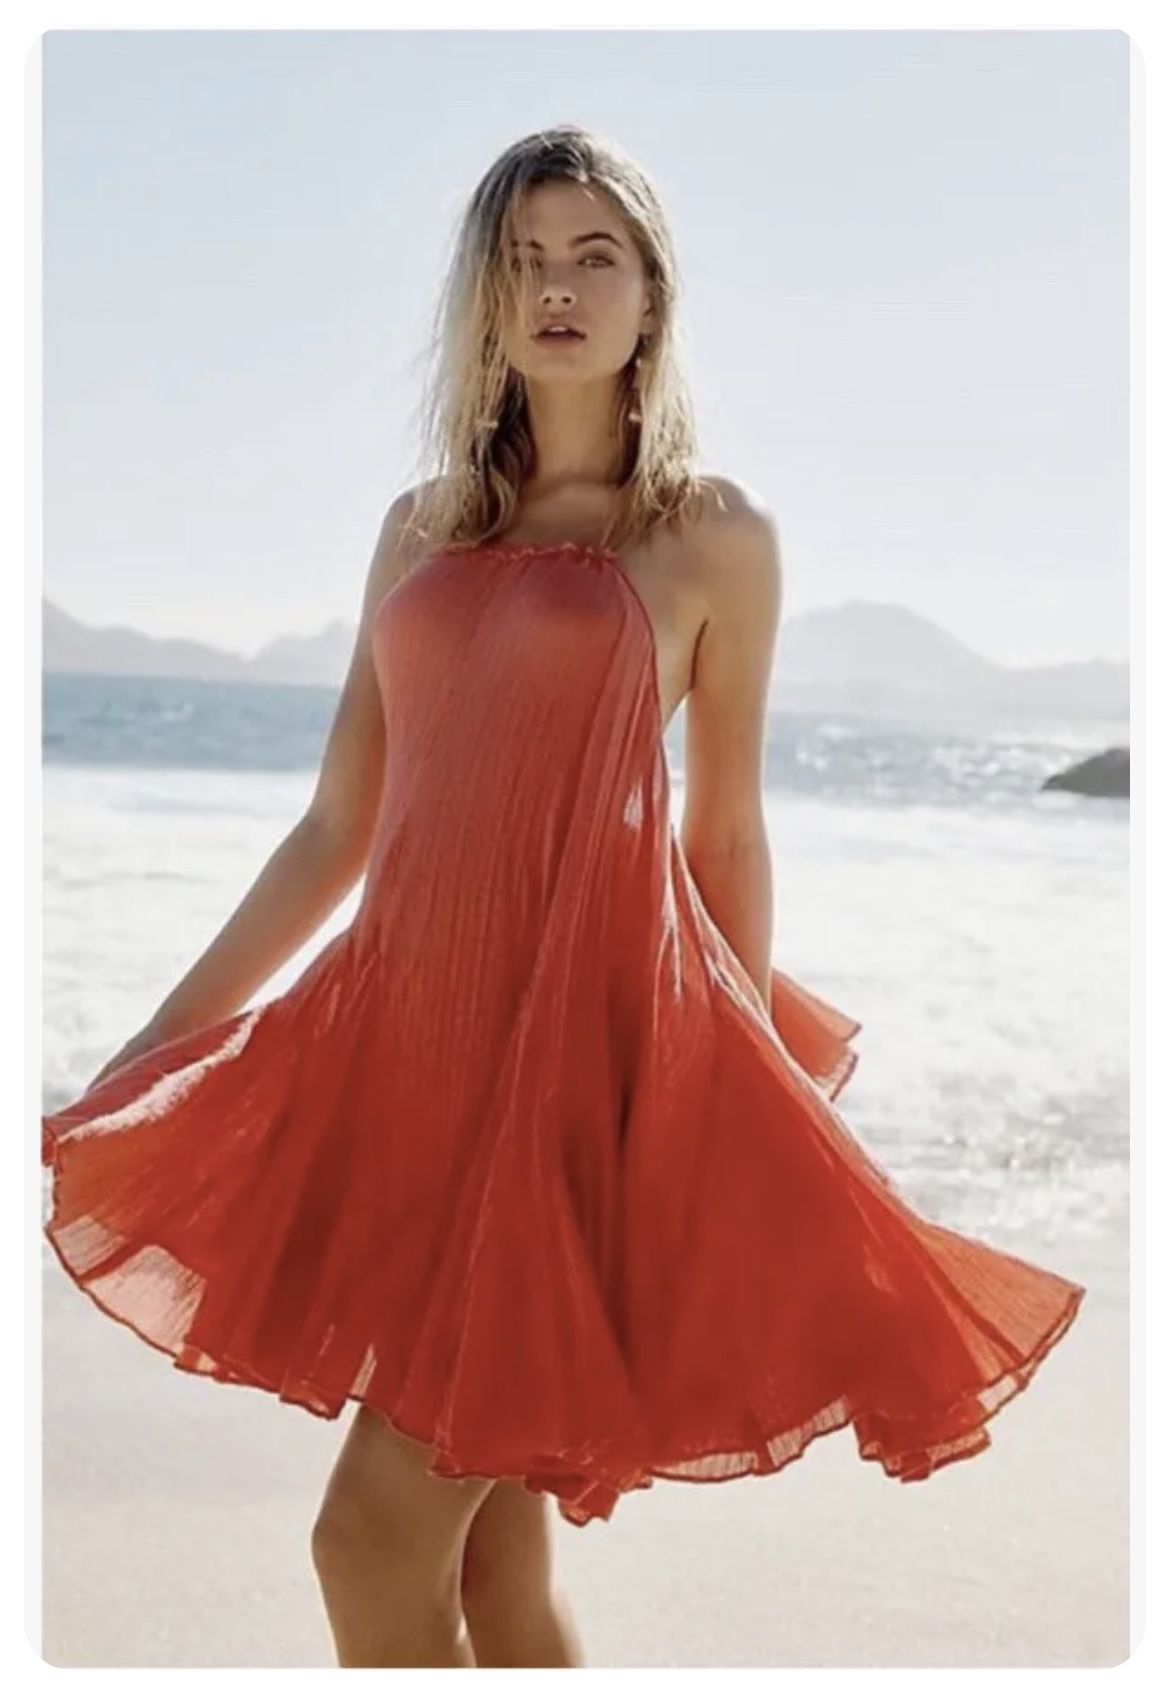 New FREE PEOPLE Catching Rays Tunic Mini Halter Dress in Coral (Medium) NWOT